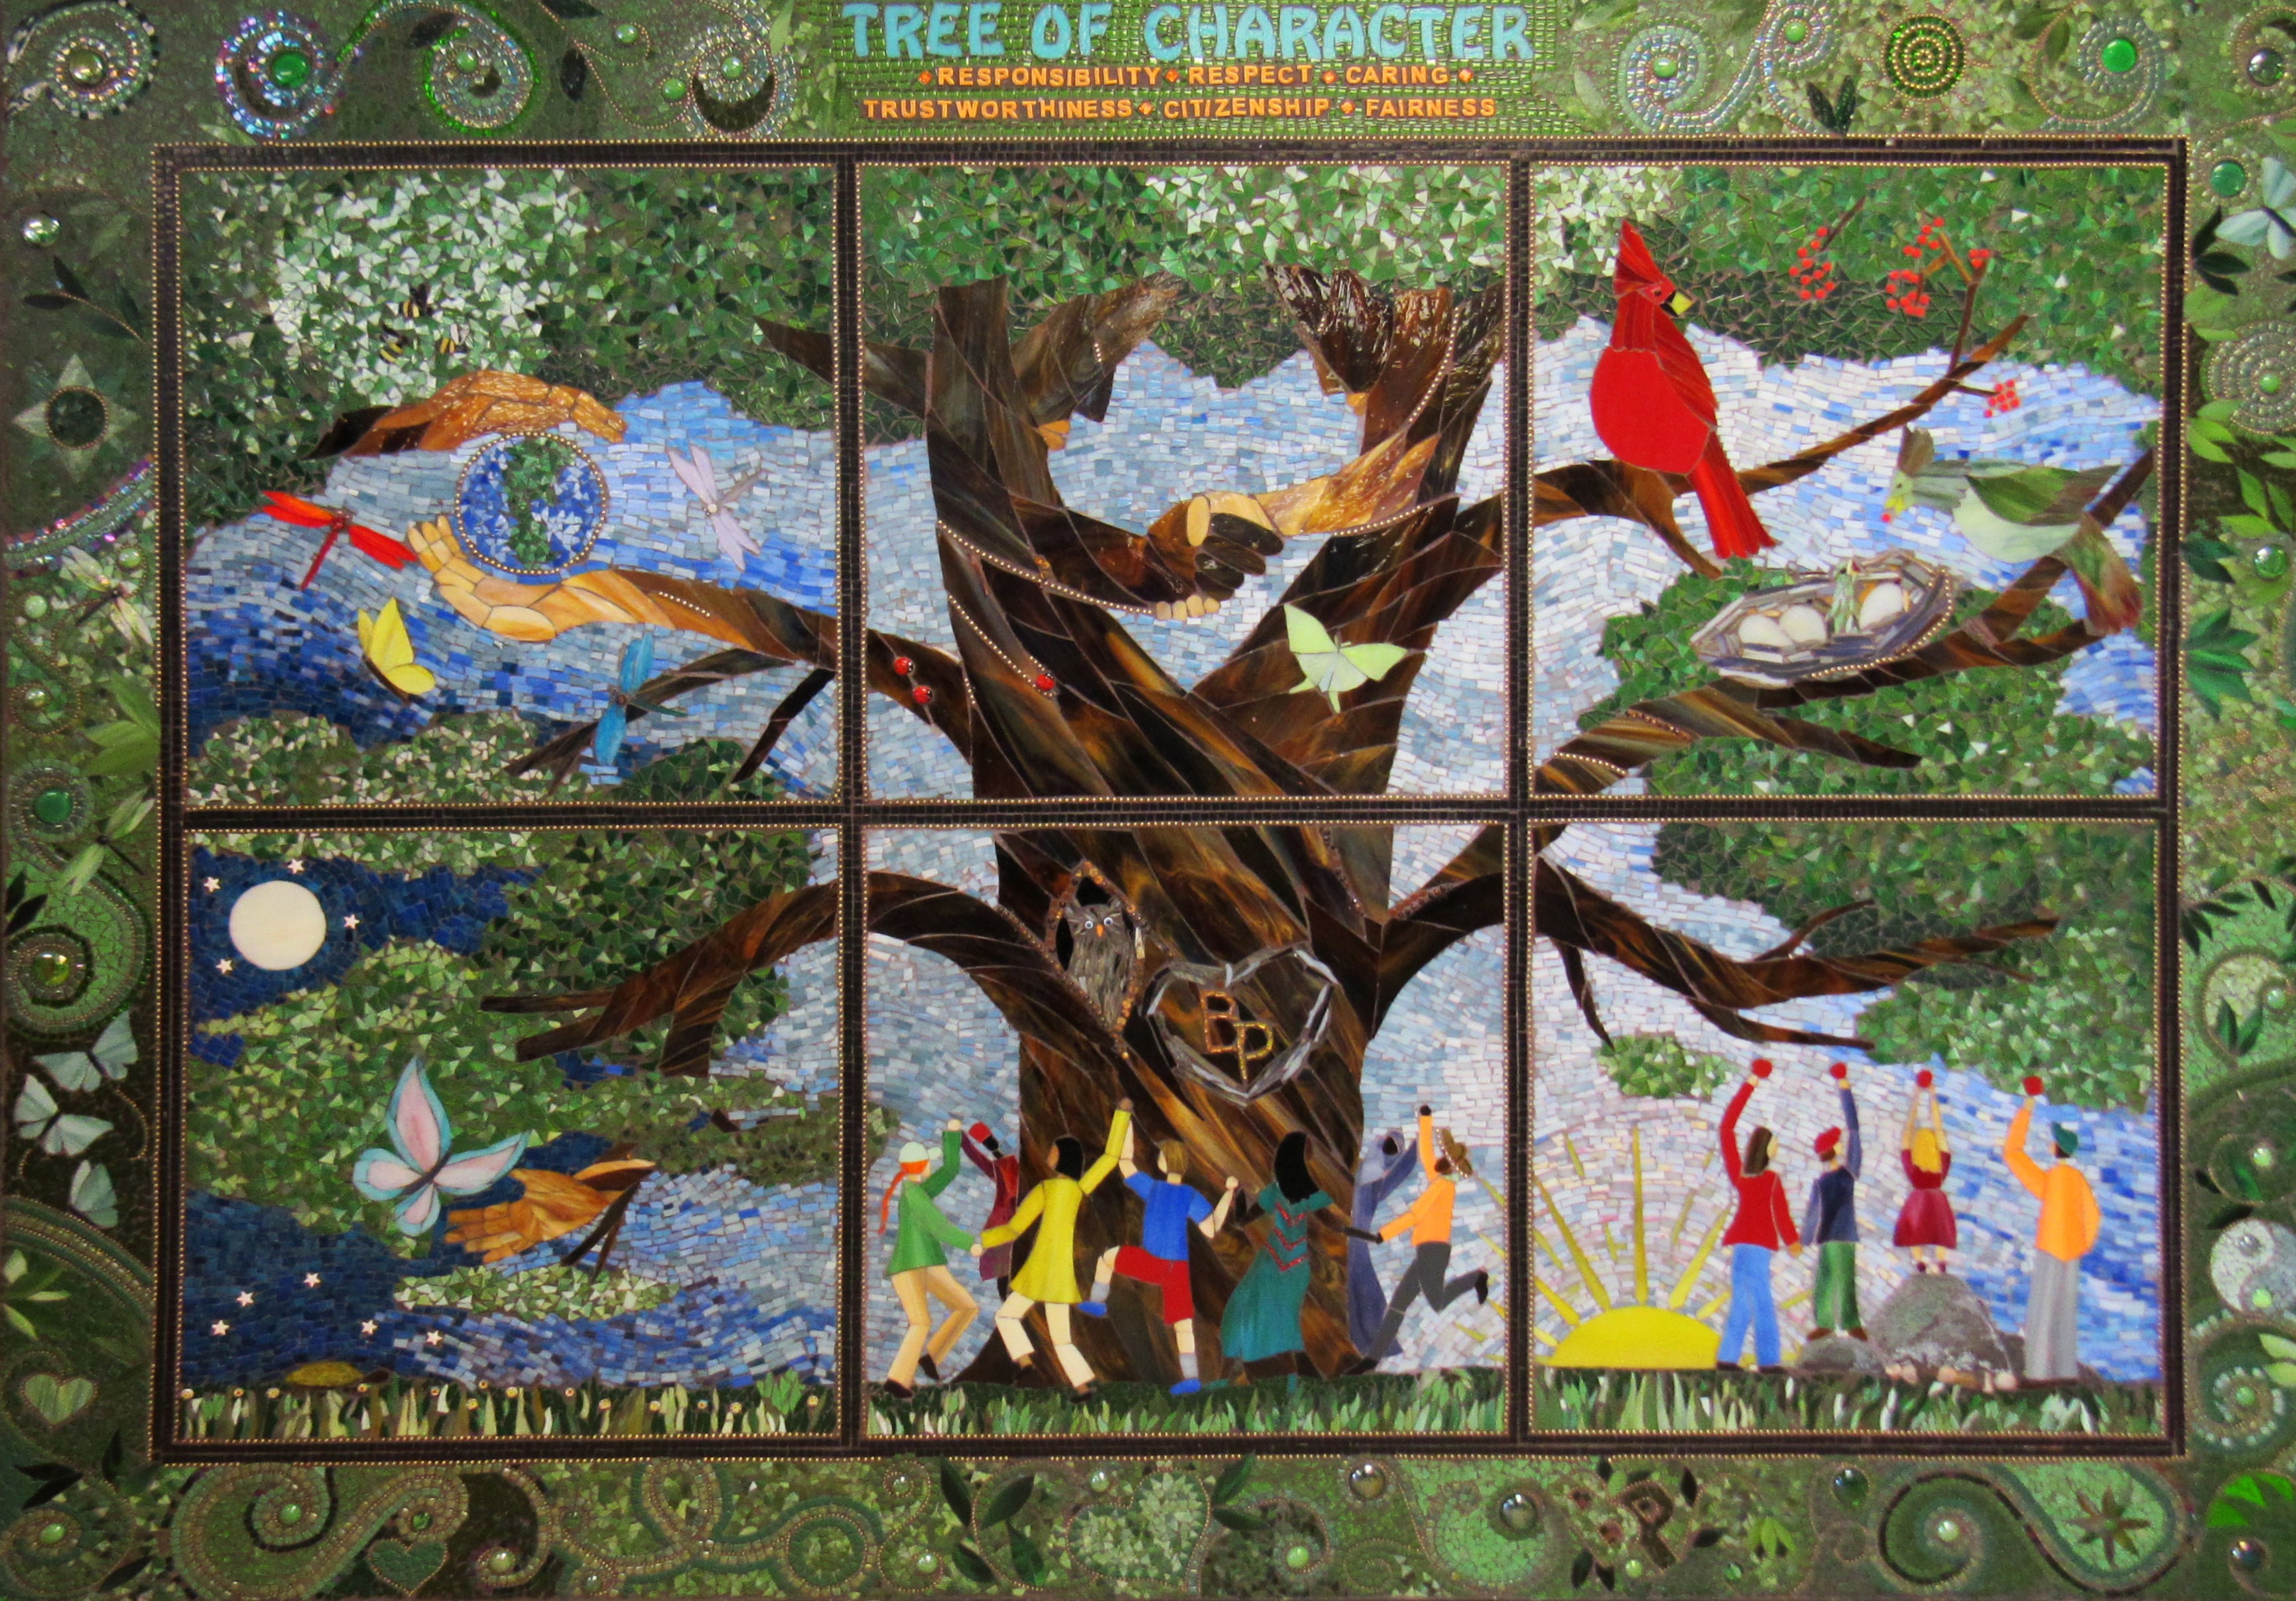 Tree of Character by Linda Biggers